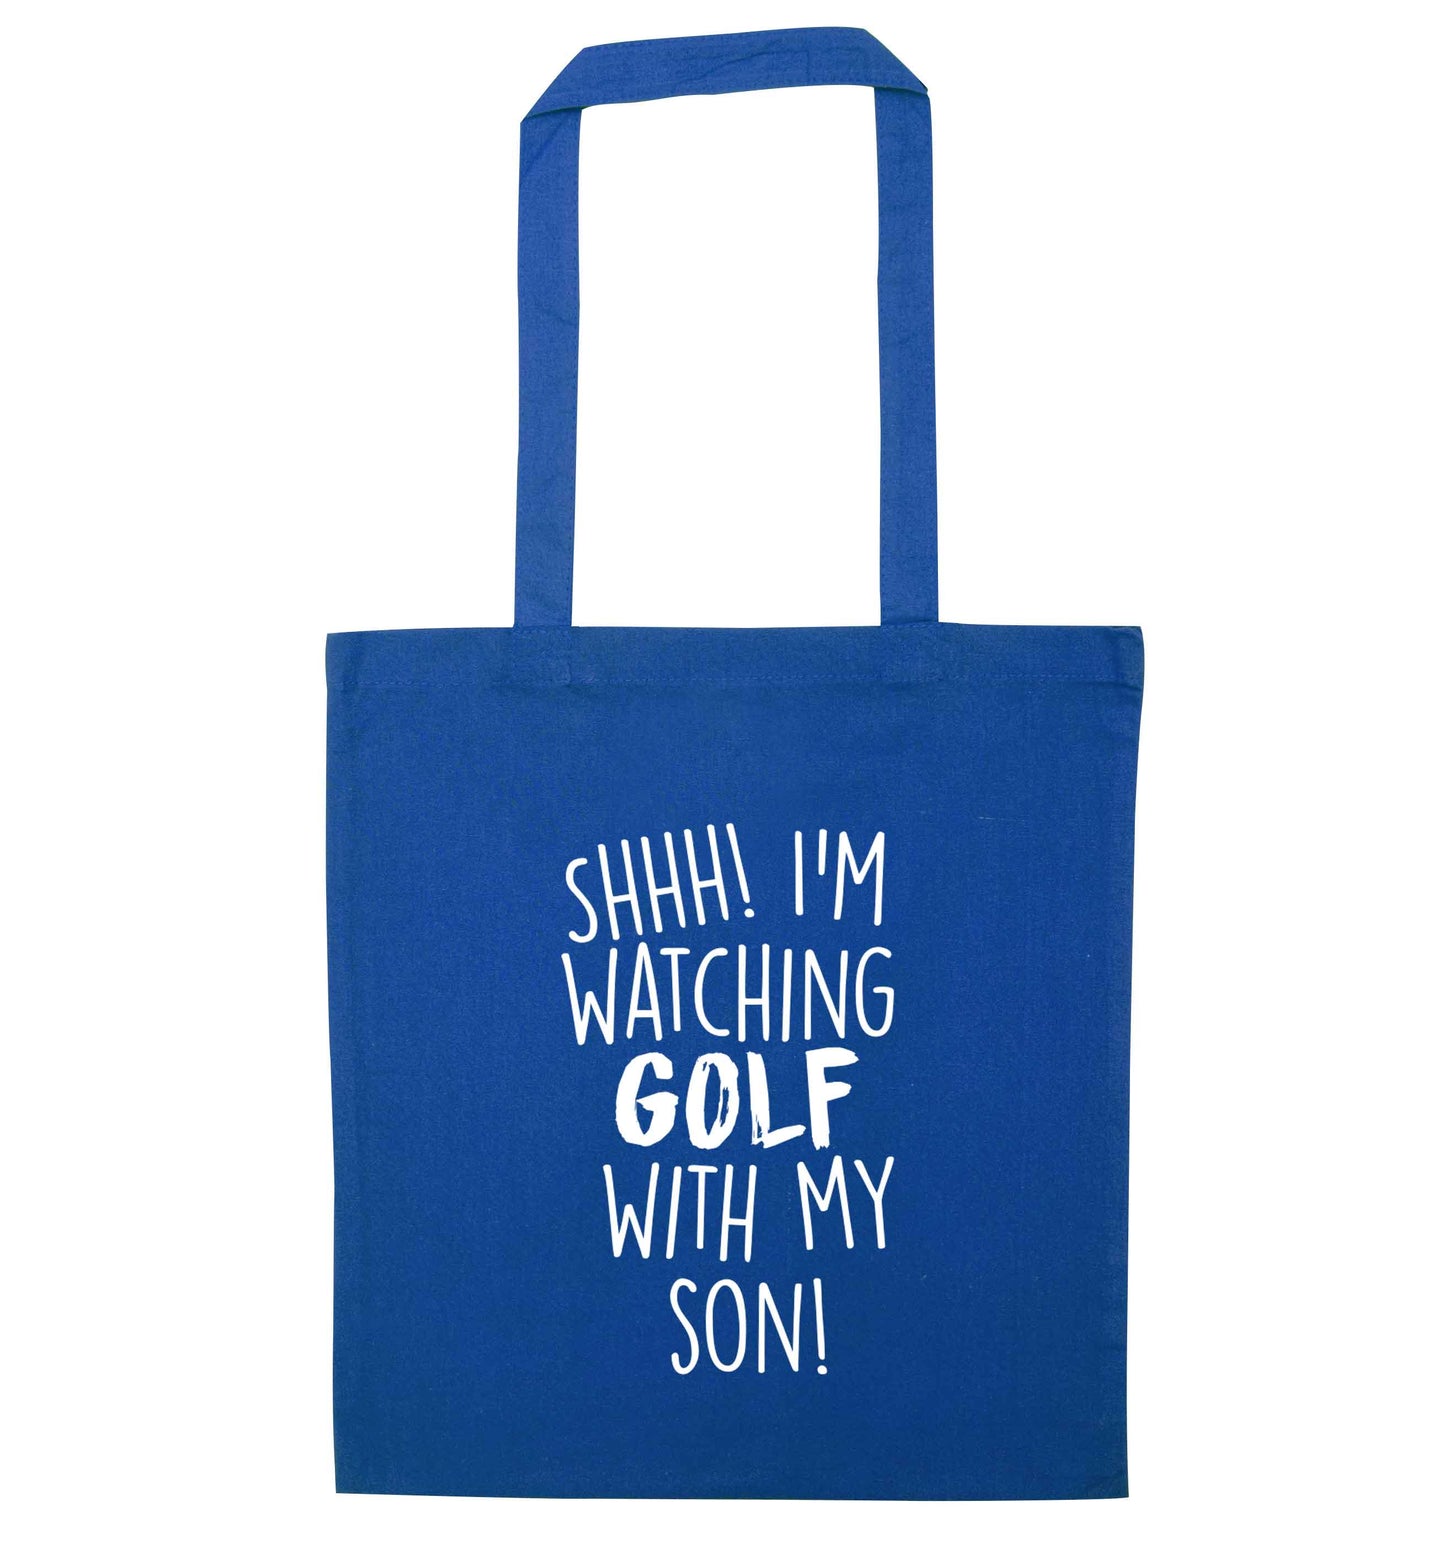 Shh I'm watching golf with my son blue tote bag